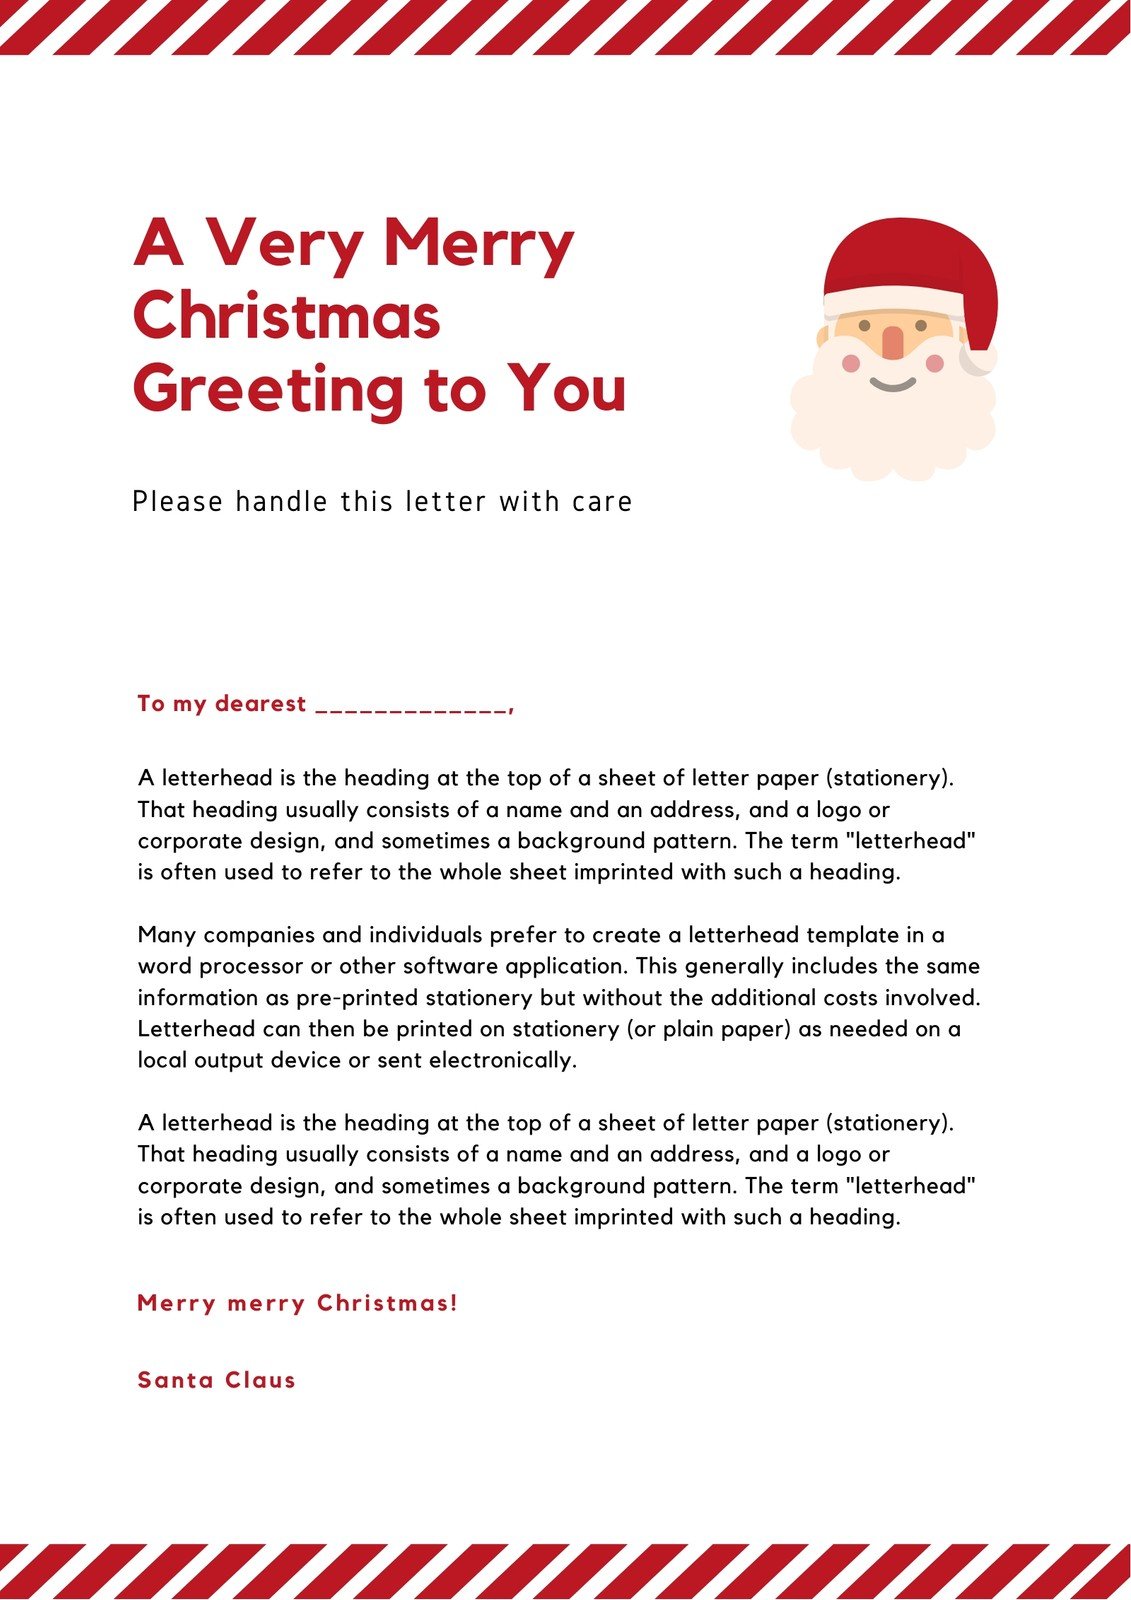 Free printable Santa letter templates you can customize  Canva With Secret Santa Letter Template